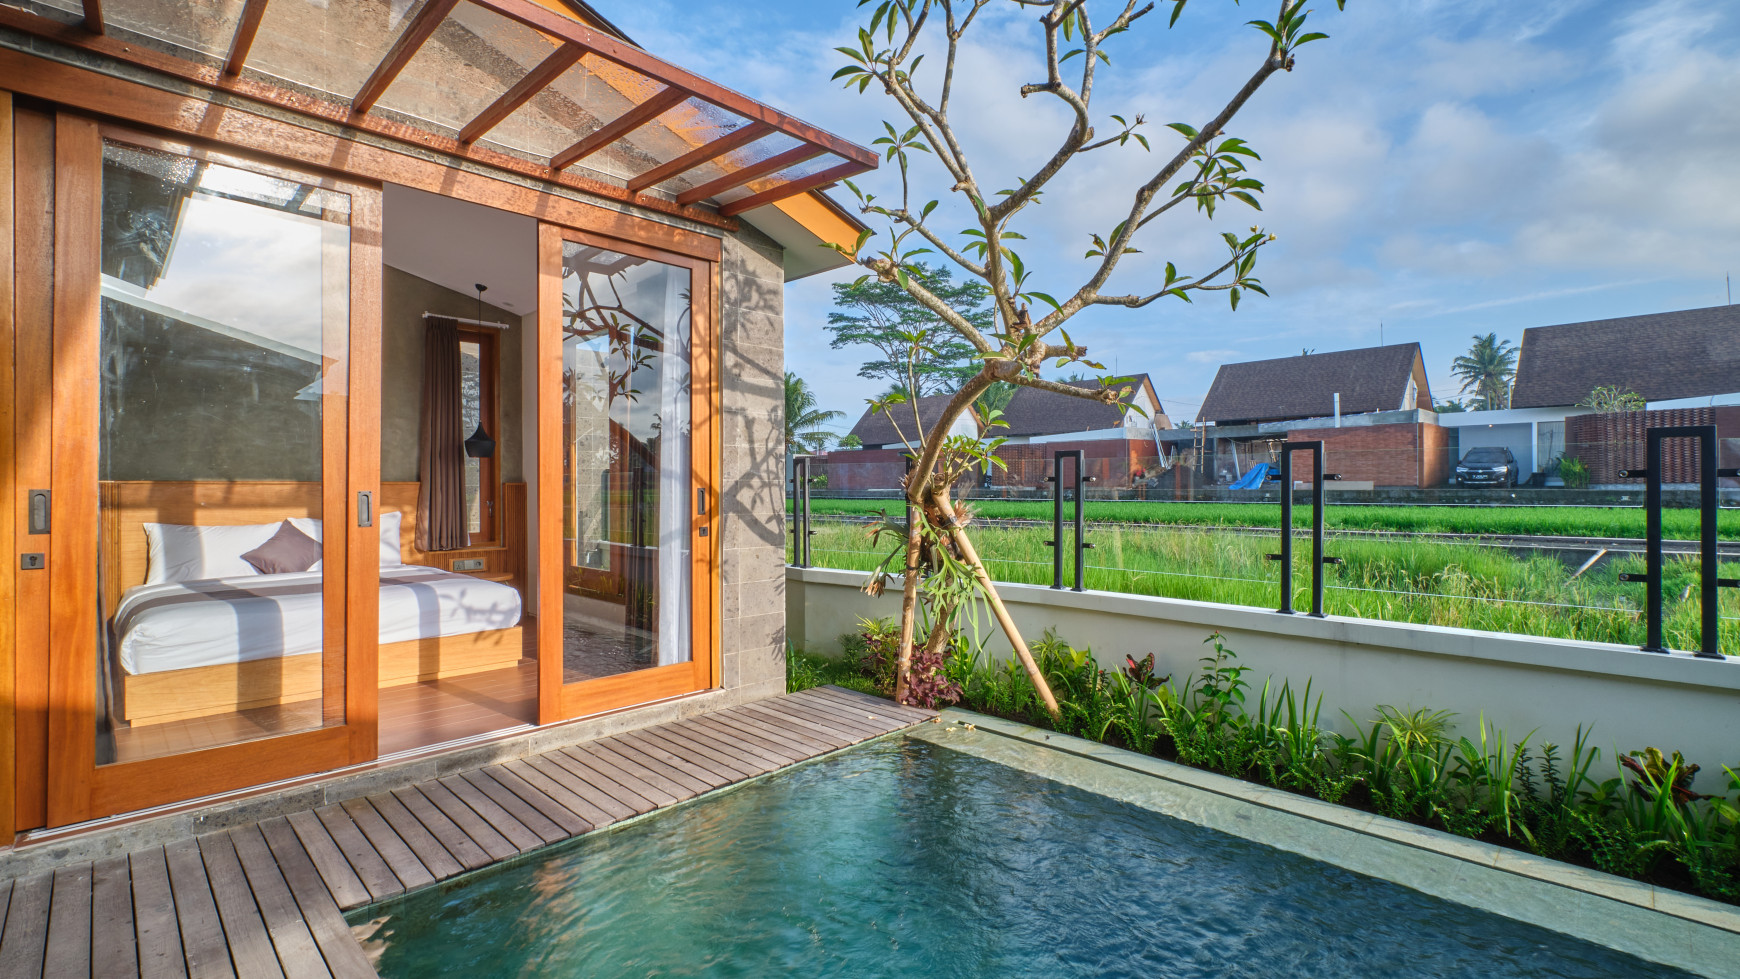 Brand New Two Bedroom Villa set on 216 sq m with rice field Views 10 Minutes from Ubud Center